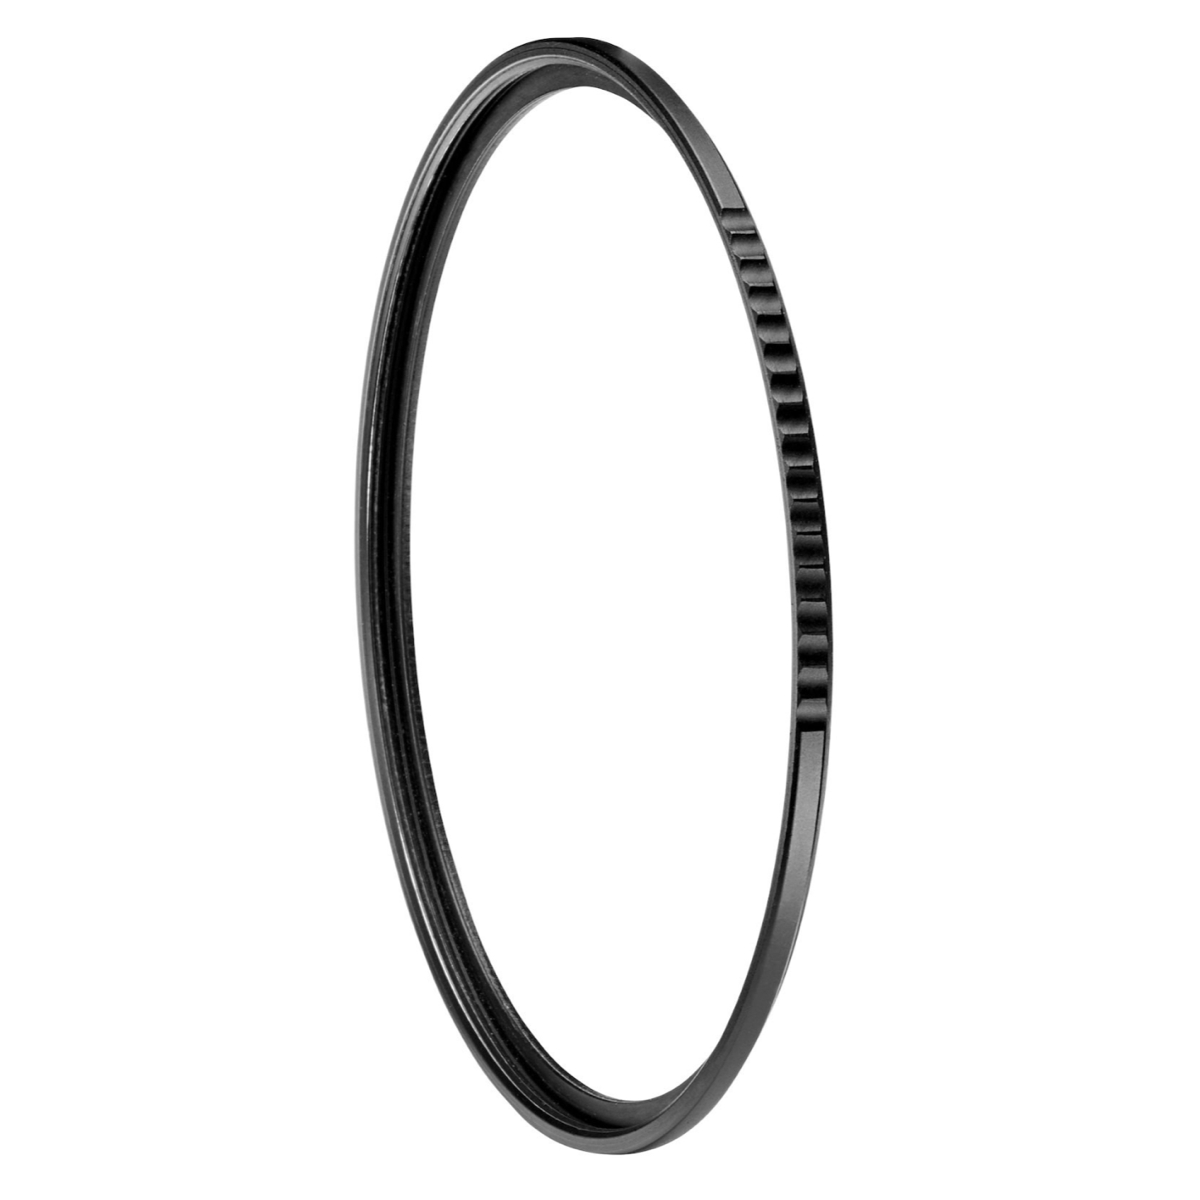 Manfrotto XUME 72mm Filter Adapter